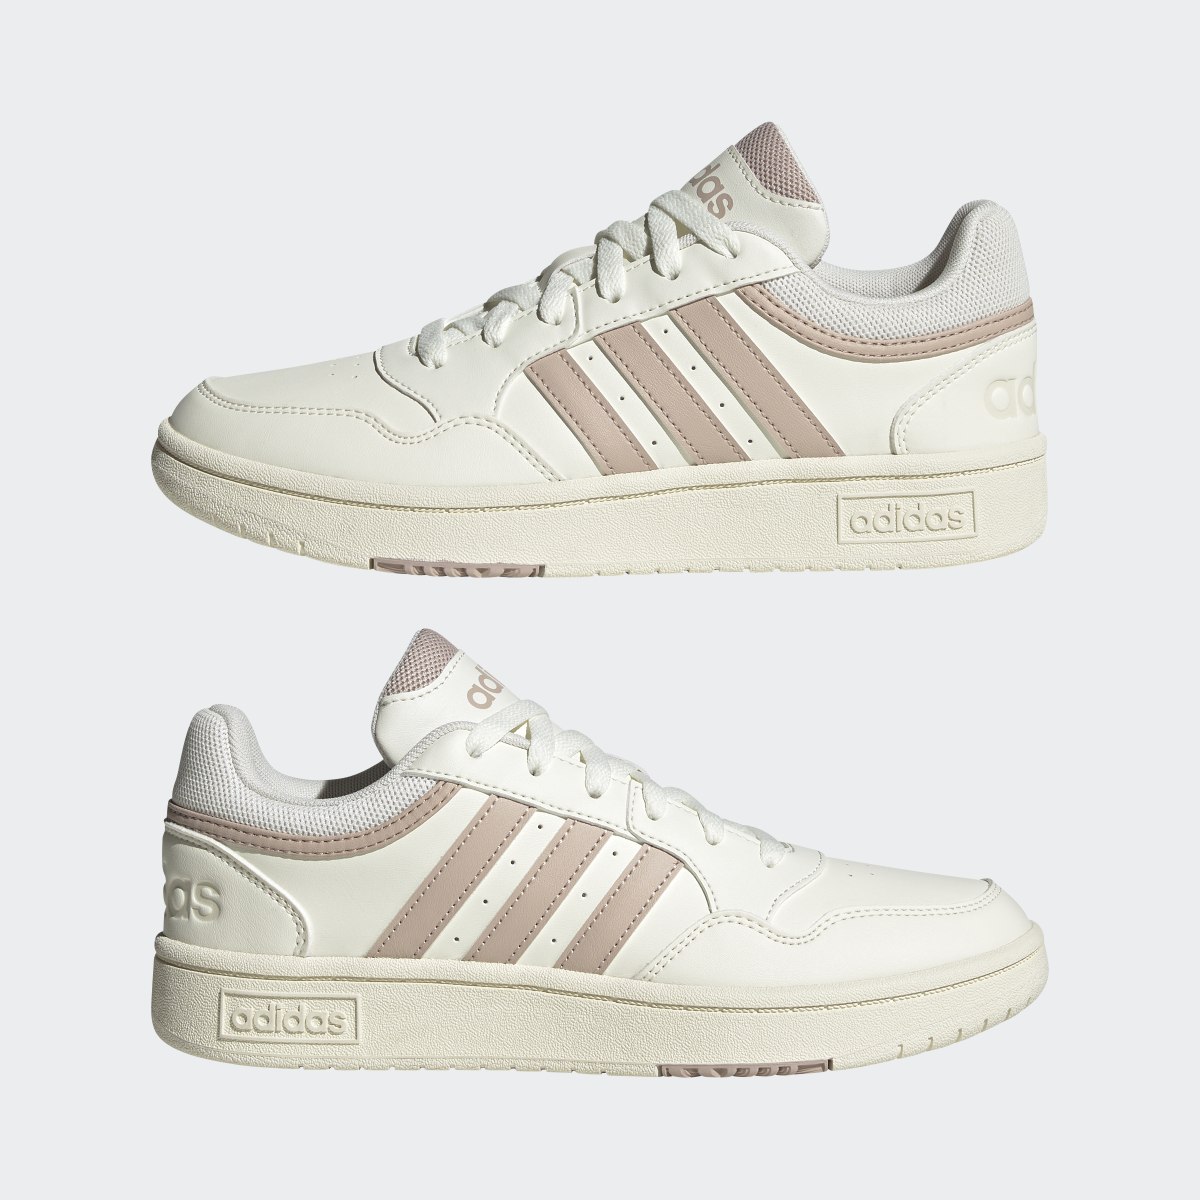 Adidas Hoops 3.0 Mid Lifestyle Basketball Low Shoes. 8